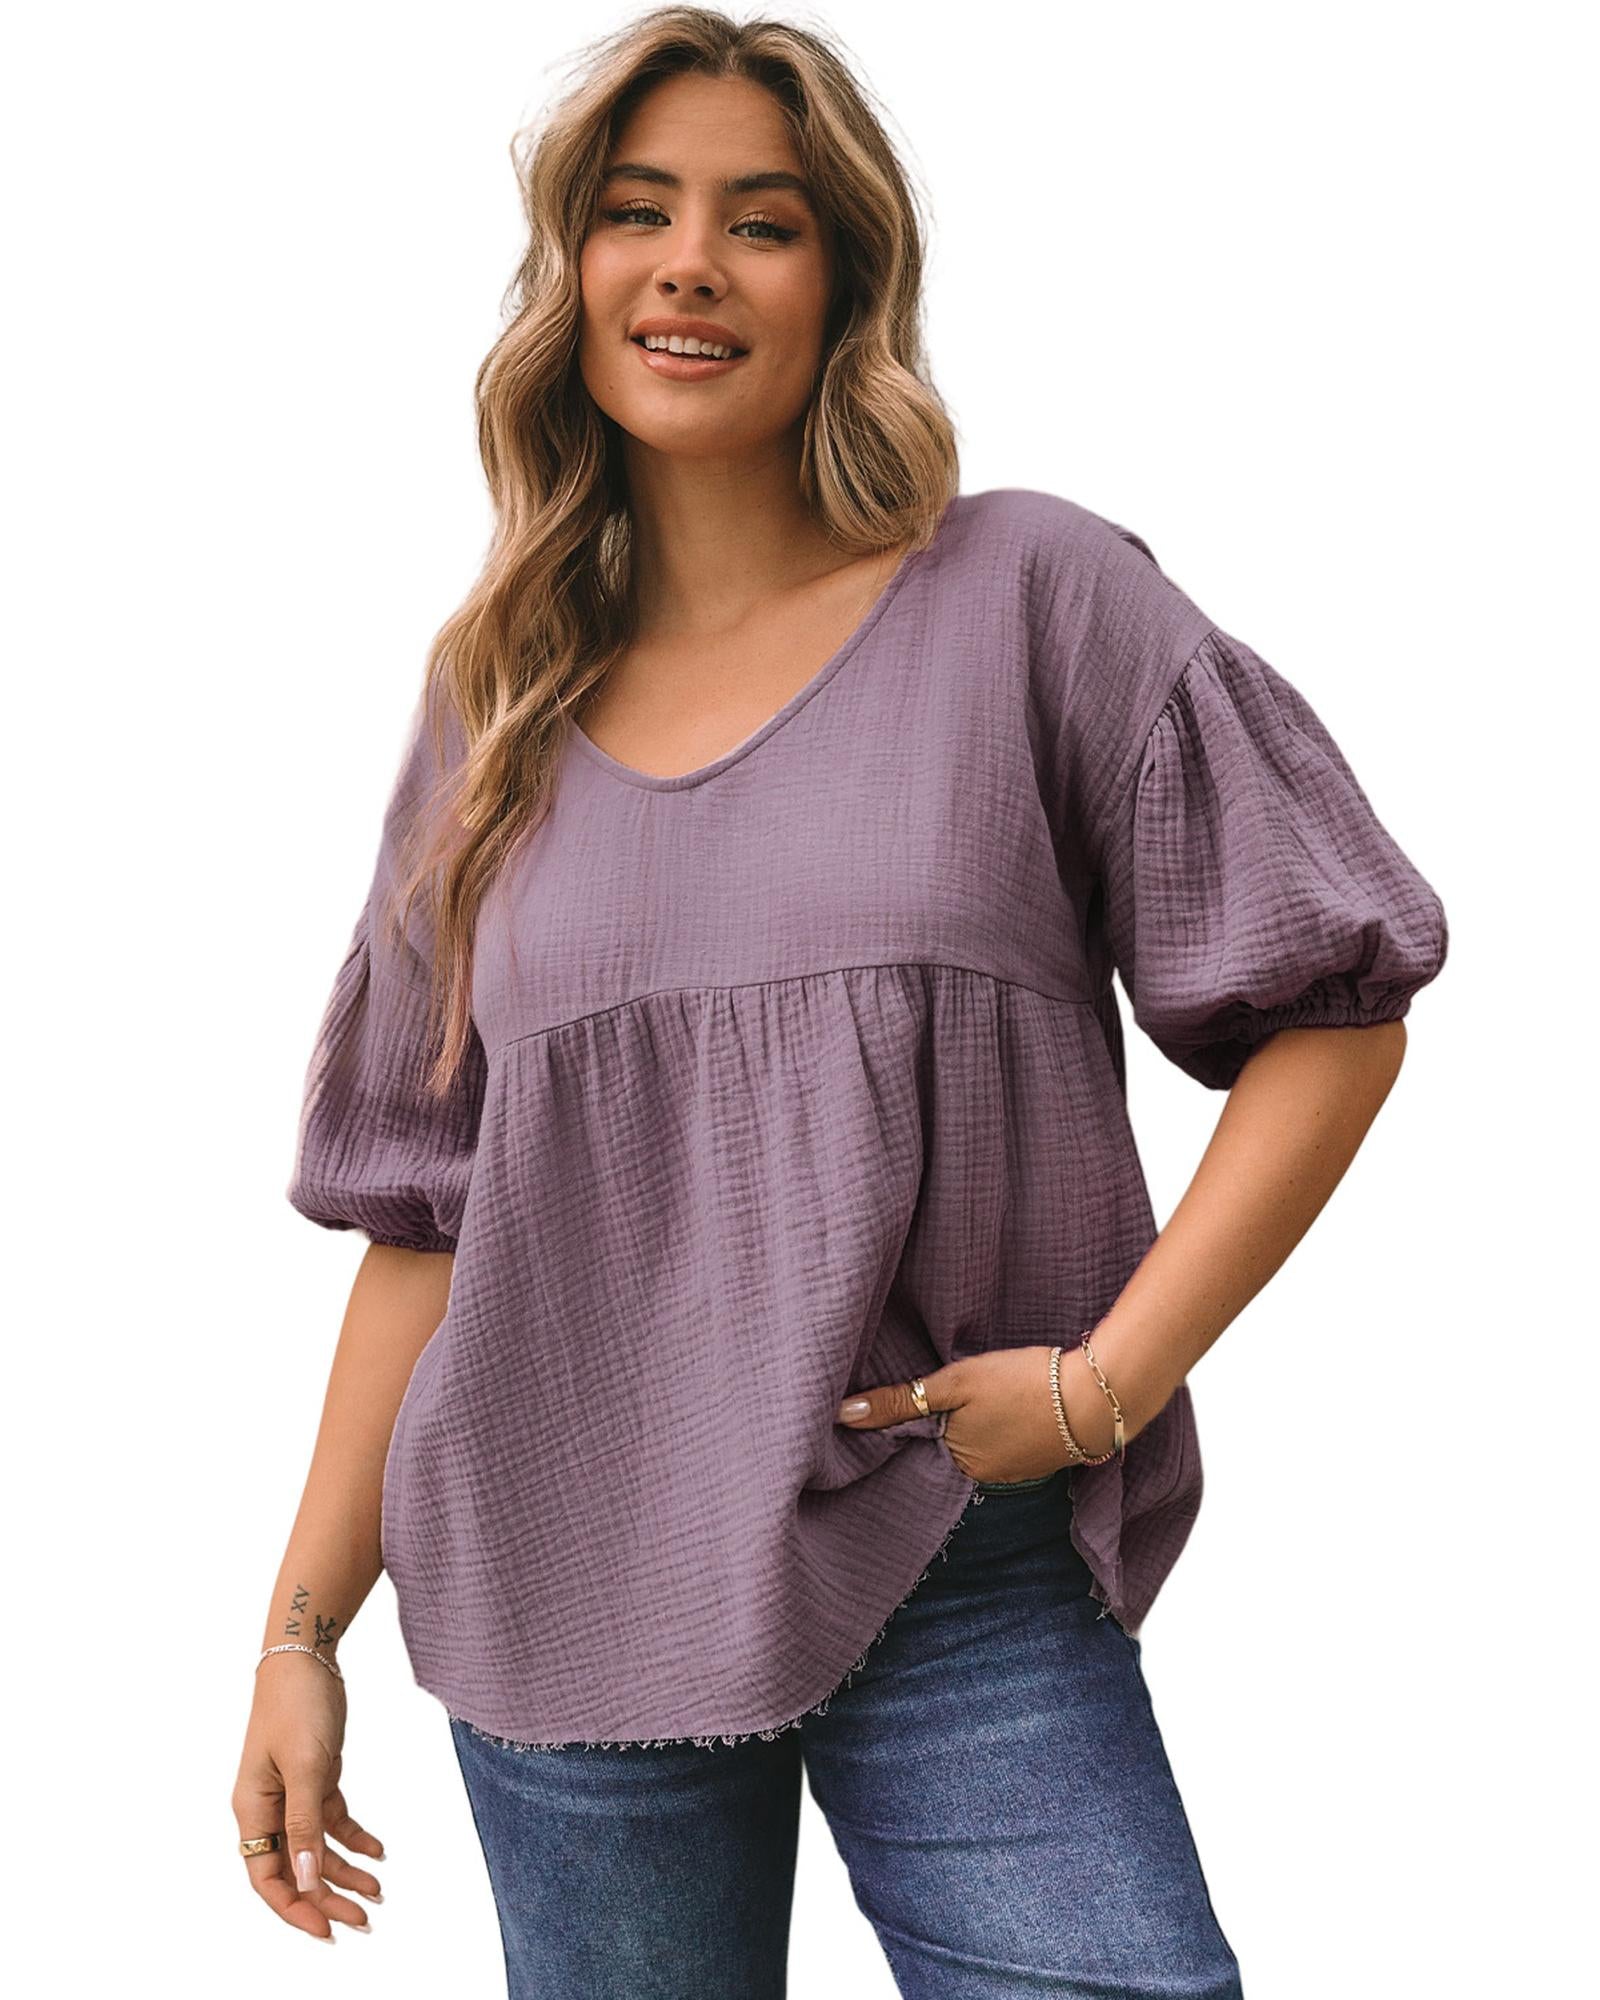 Textured Bubble Sleeves Top - S